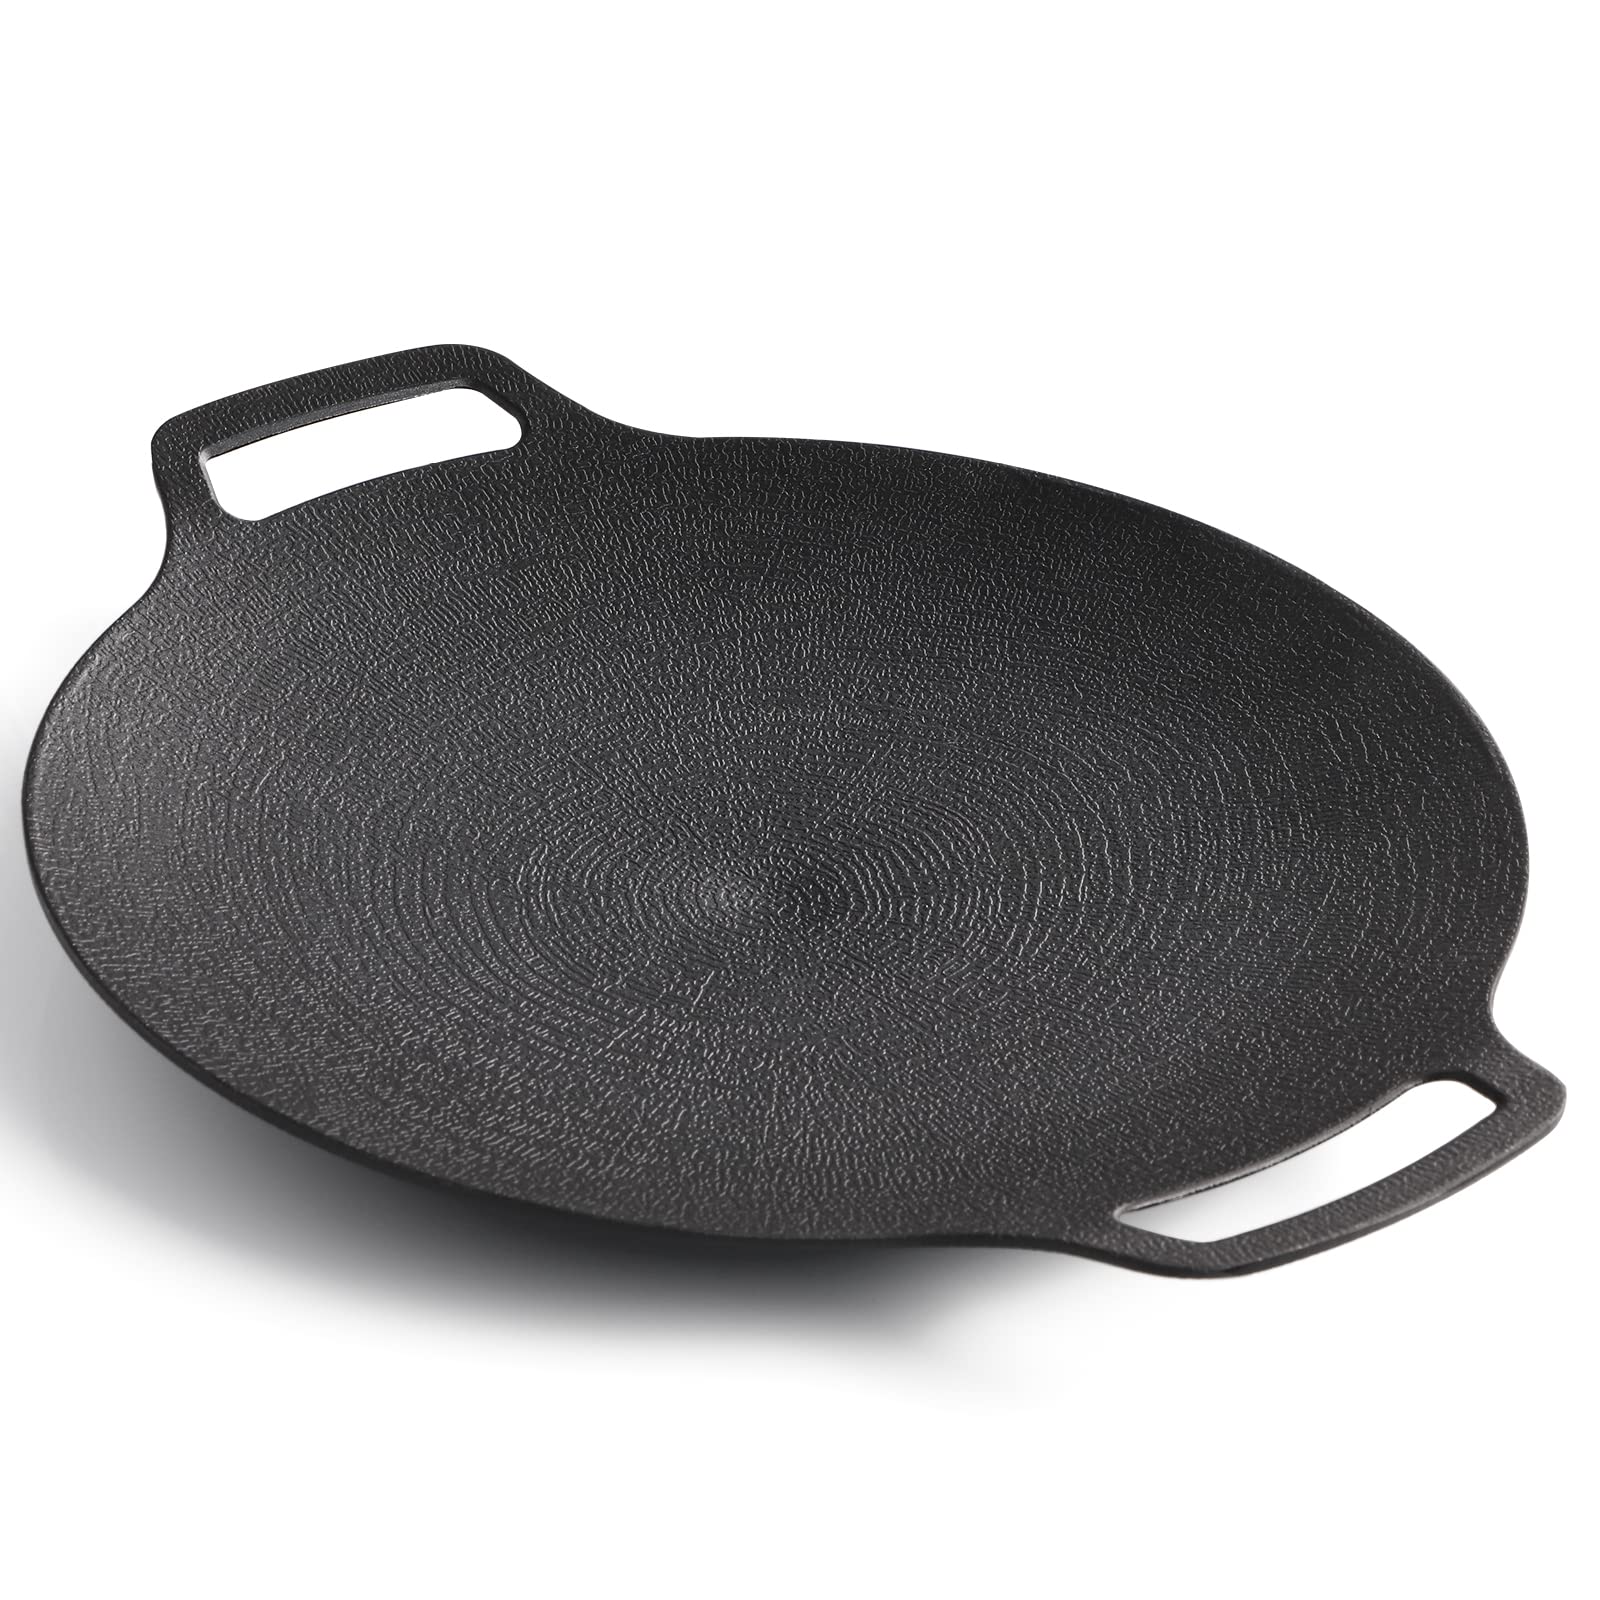 Korean Grill Pan Nonstick 6 Layer | 40cm Round BBQ Griddle | Indoor or Outdoor Cooking